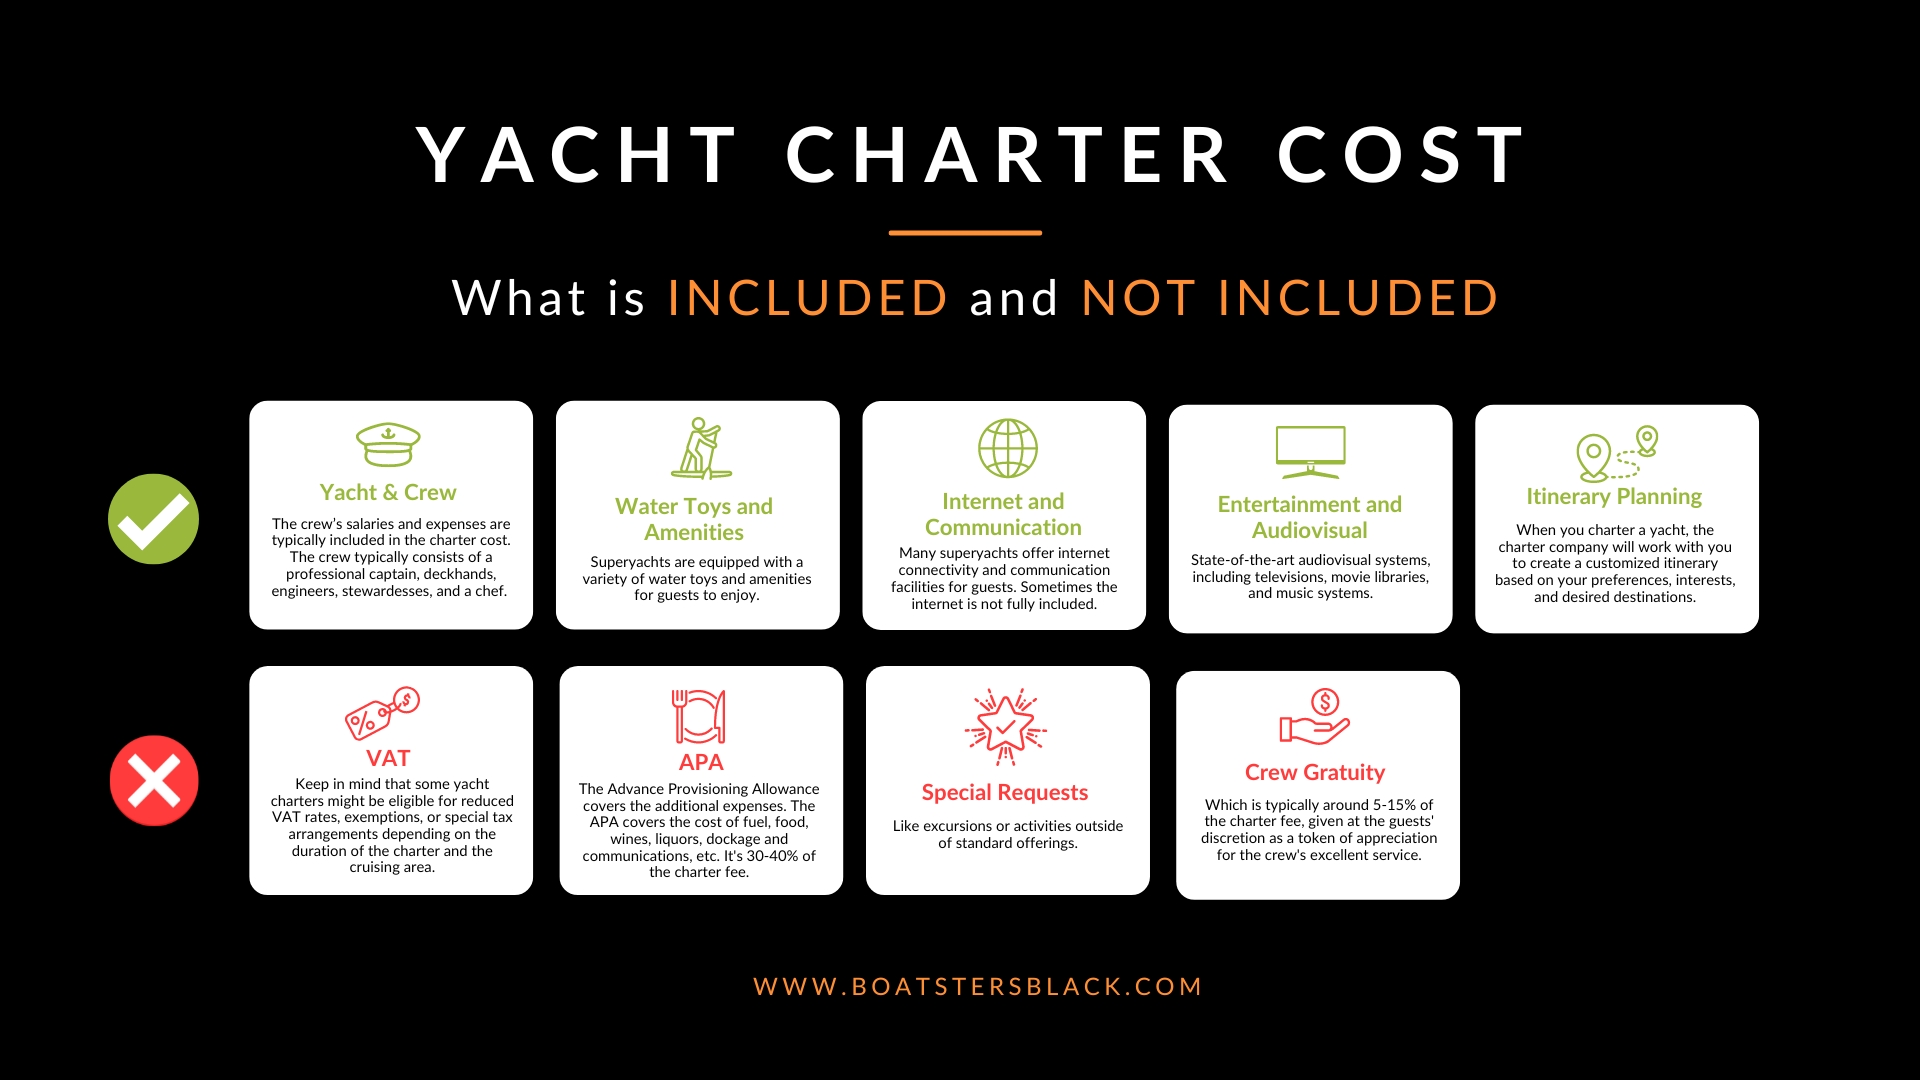 How much does a yacht charter cost: What is INCLUDED and NOT INCLUDED